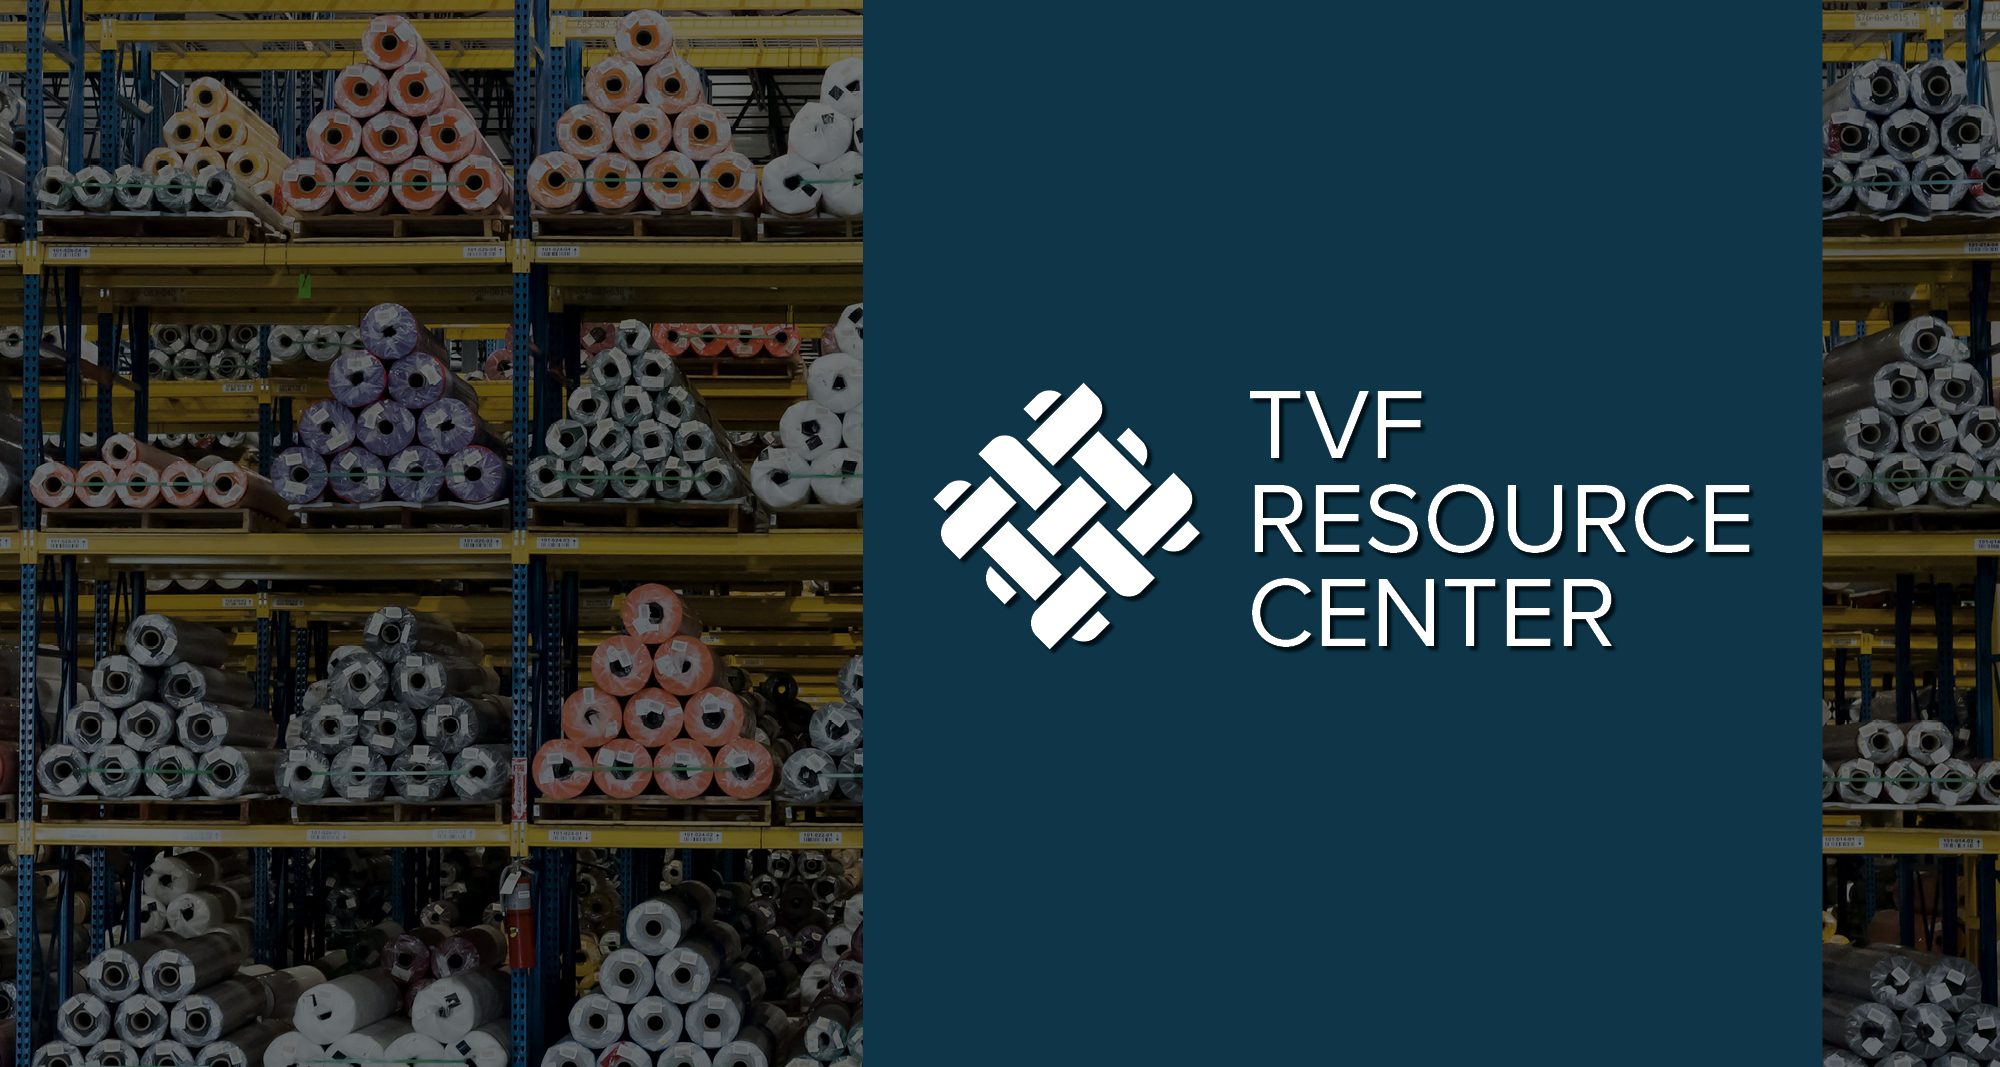 The TVF Resource Center – The Source for Everything Fabric Related